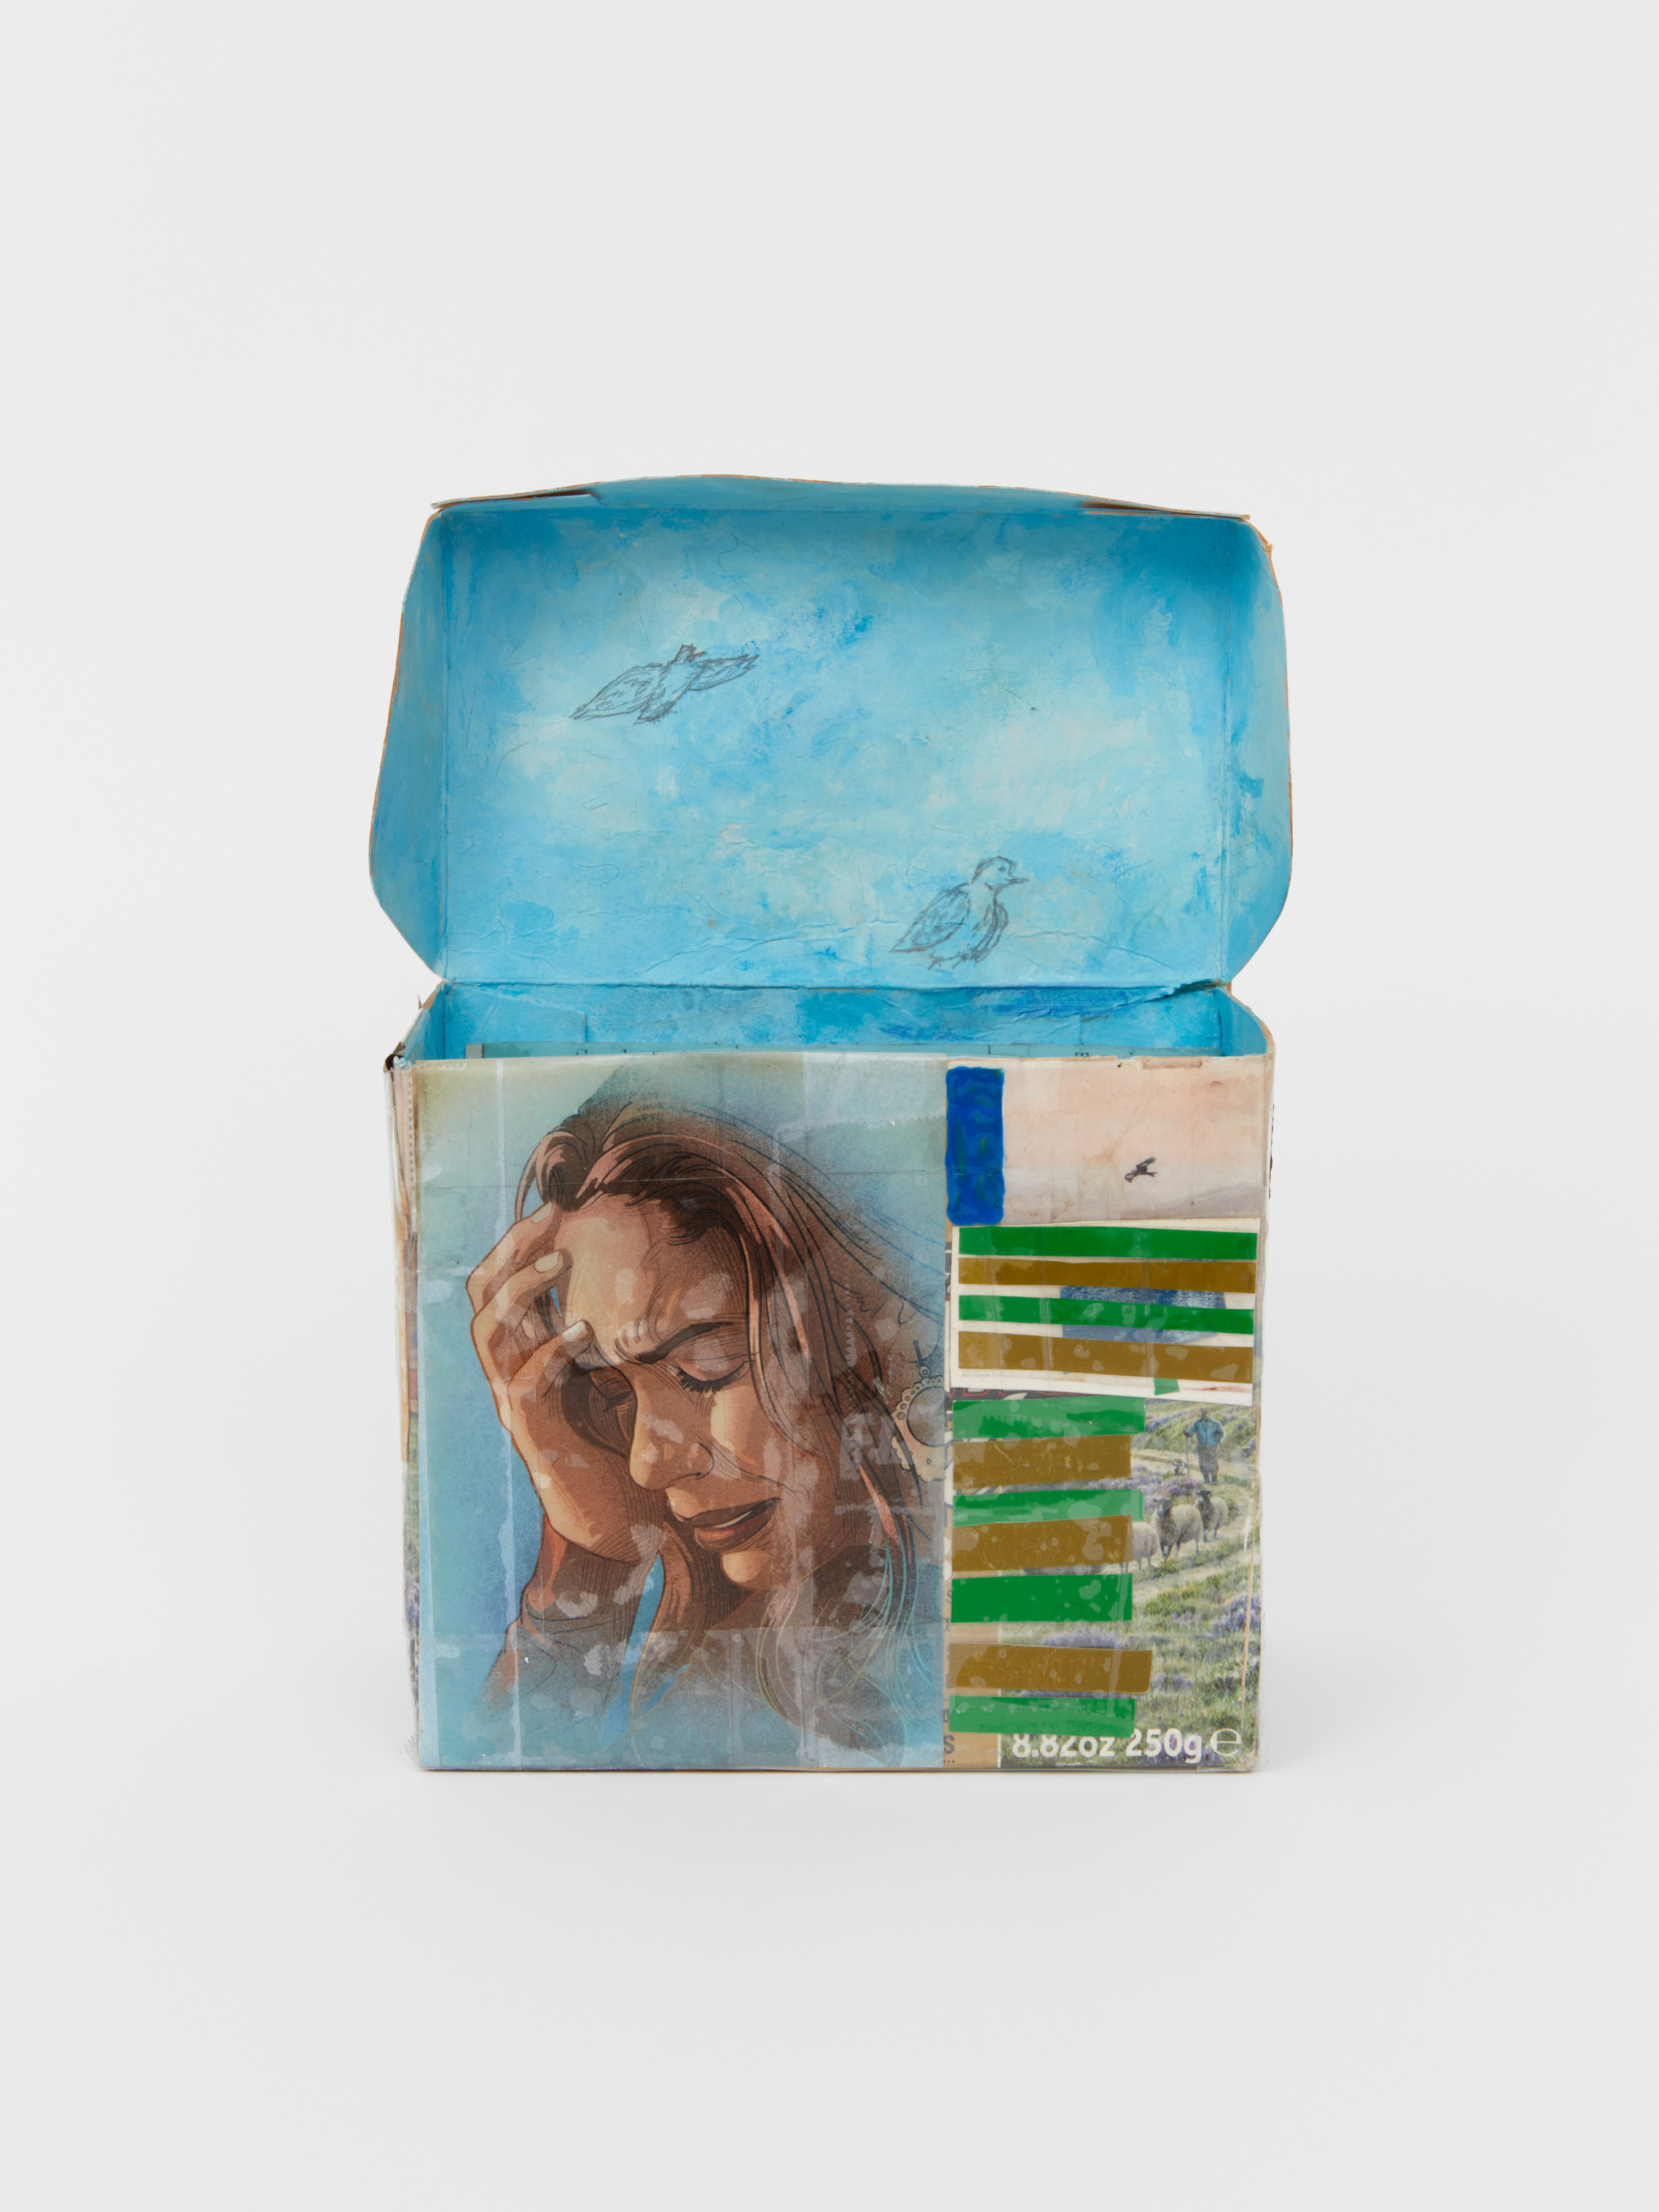 A small box sculpture with an image of a woman in distress on the outside and drawings of birds flying on the inside of the open lid of the box.